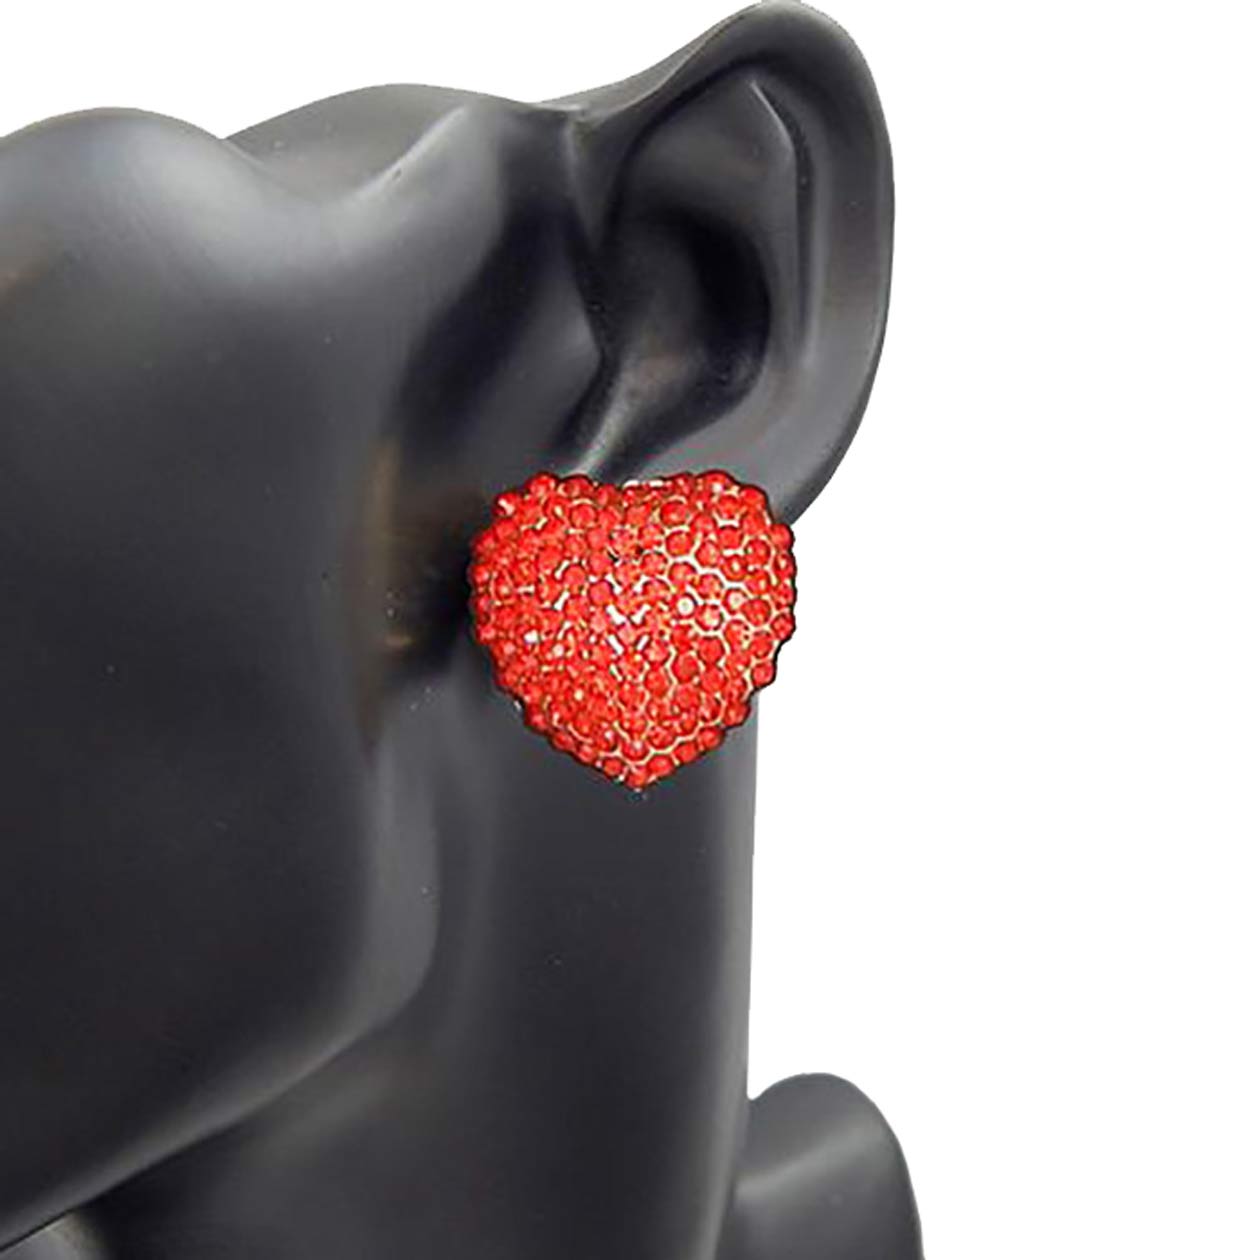 Red Crystal Embellished Heart Stud Earrings, Accent your attire with these beautiful heart stud earrings. Wear these gorgeous crystal embellished earrings to make you stand out from the crowd & show your trendy choice. Boasting a romantic palette and silhouette. This pretty pair of heart stud earrings instantly elevates everything from playful motifs to sleek separates.